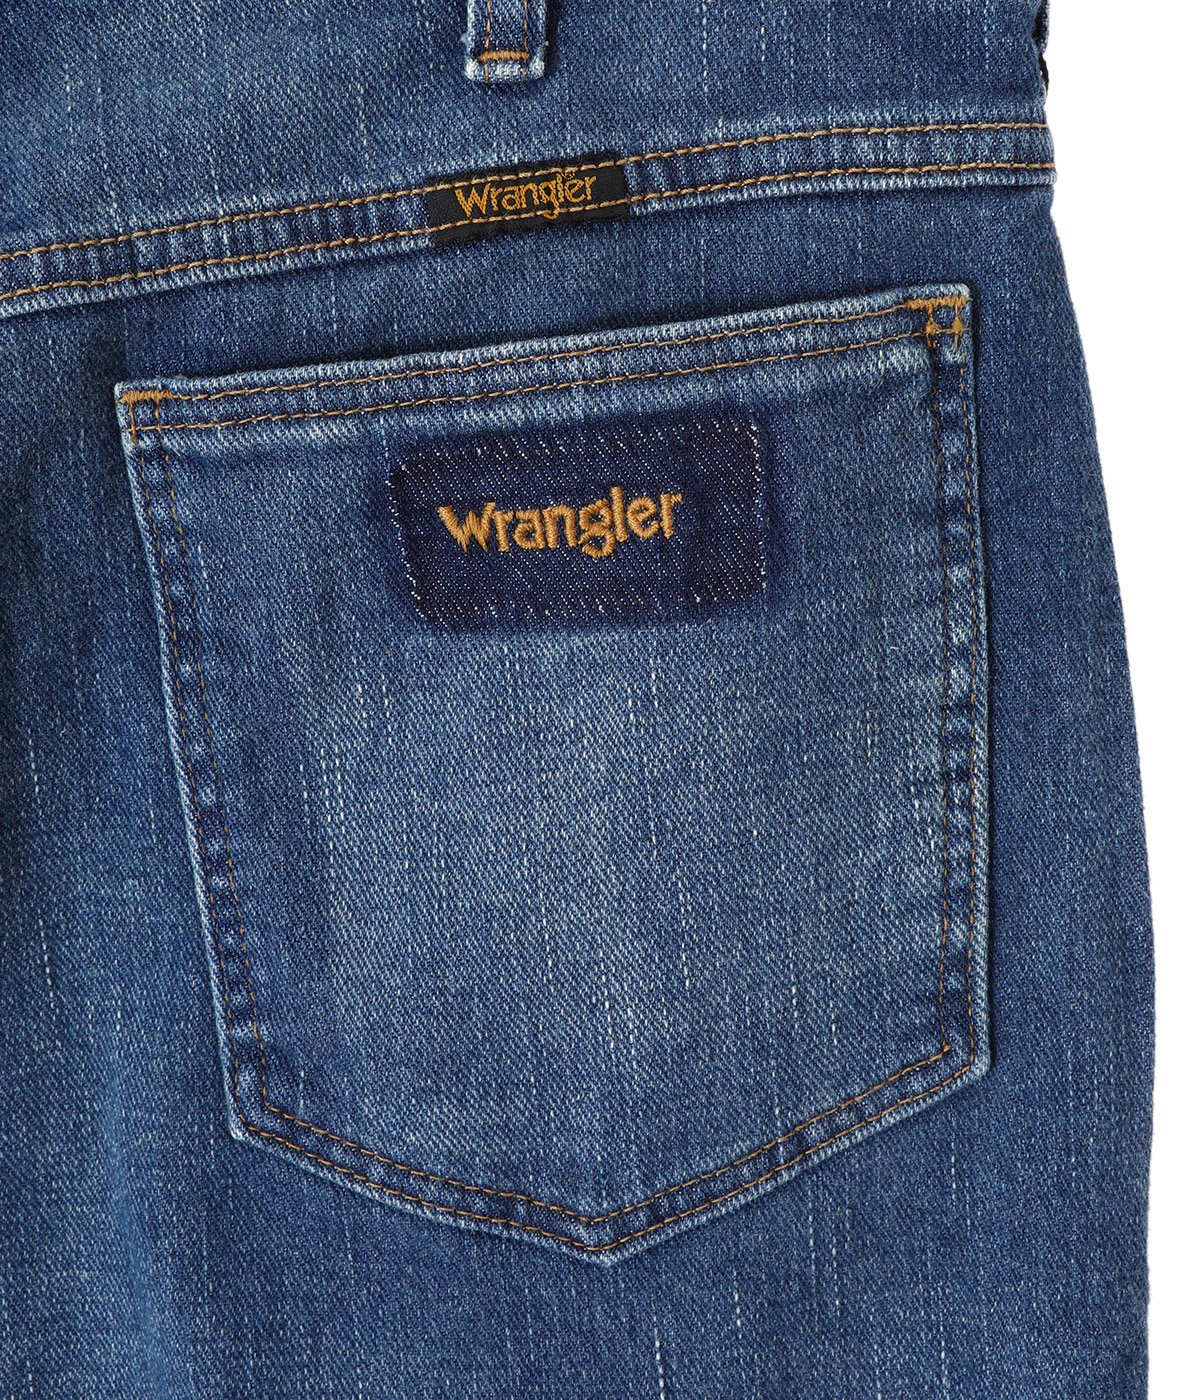 WRANGLER×N.HOOLYWOOD COMPILE　WRANCHER 6221-WR02-2